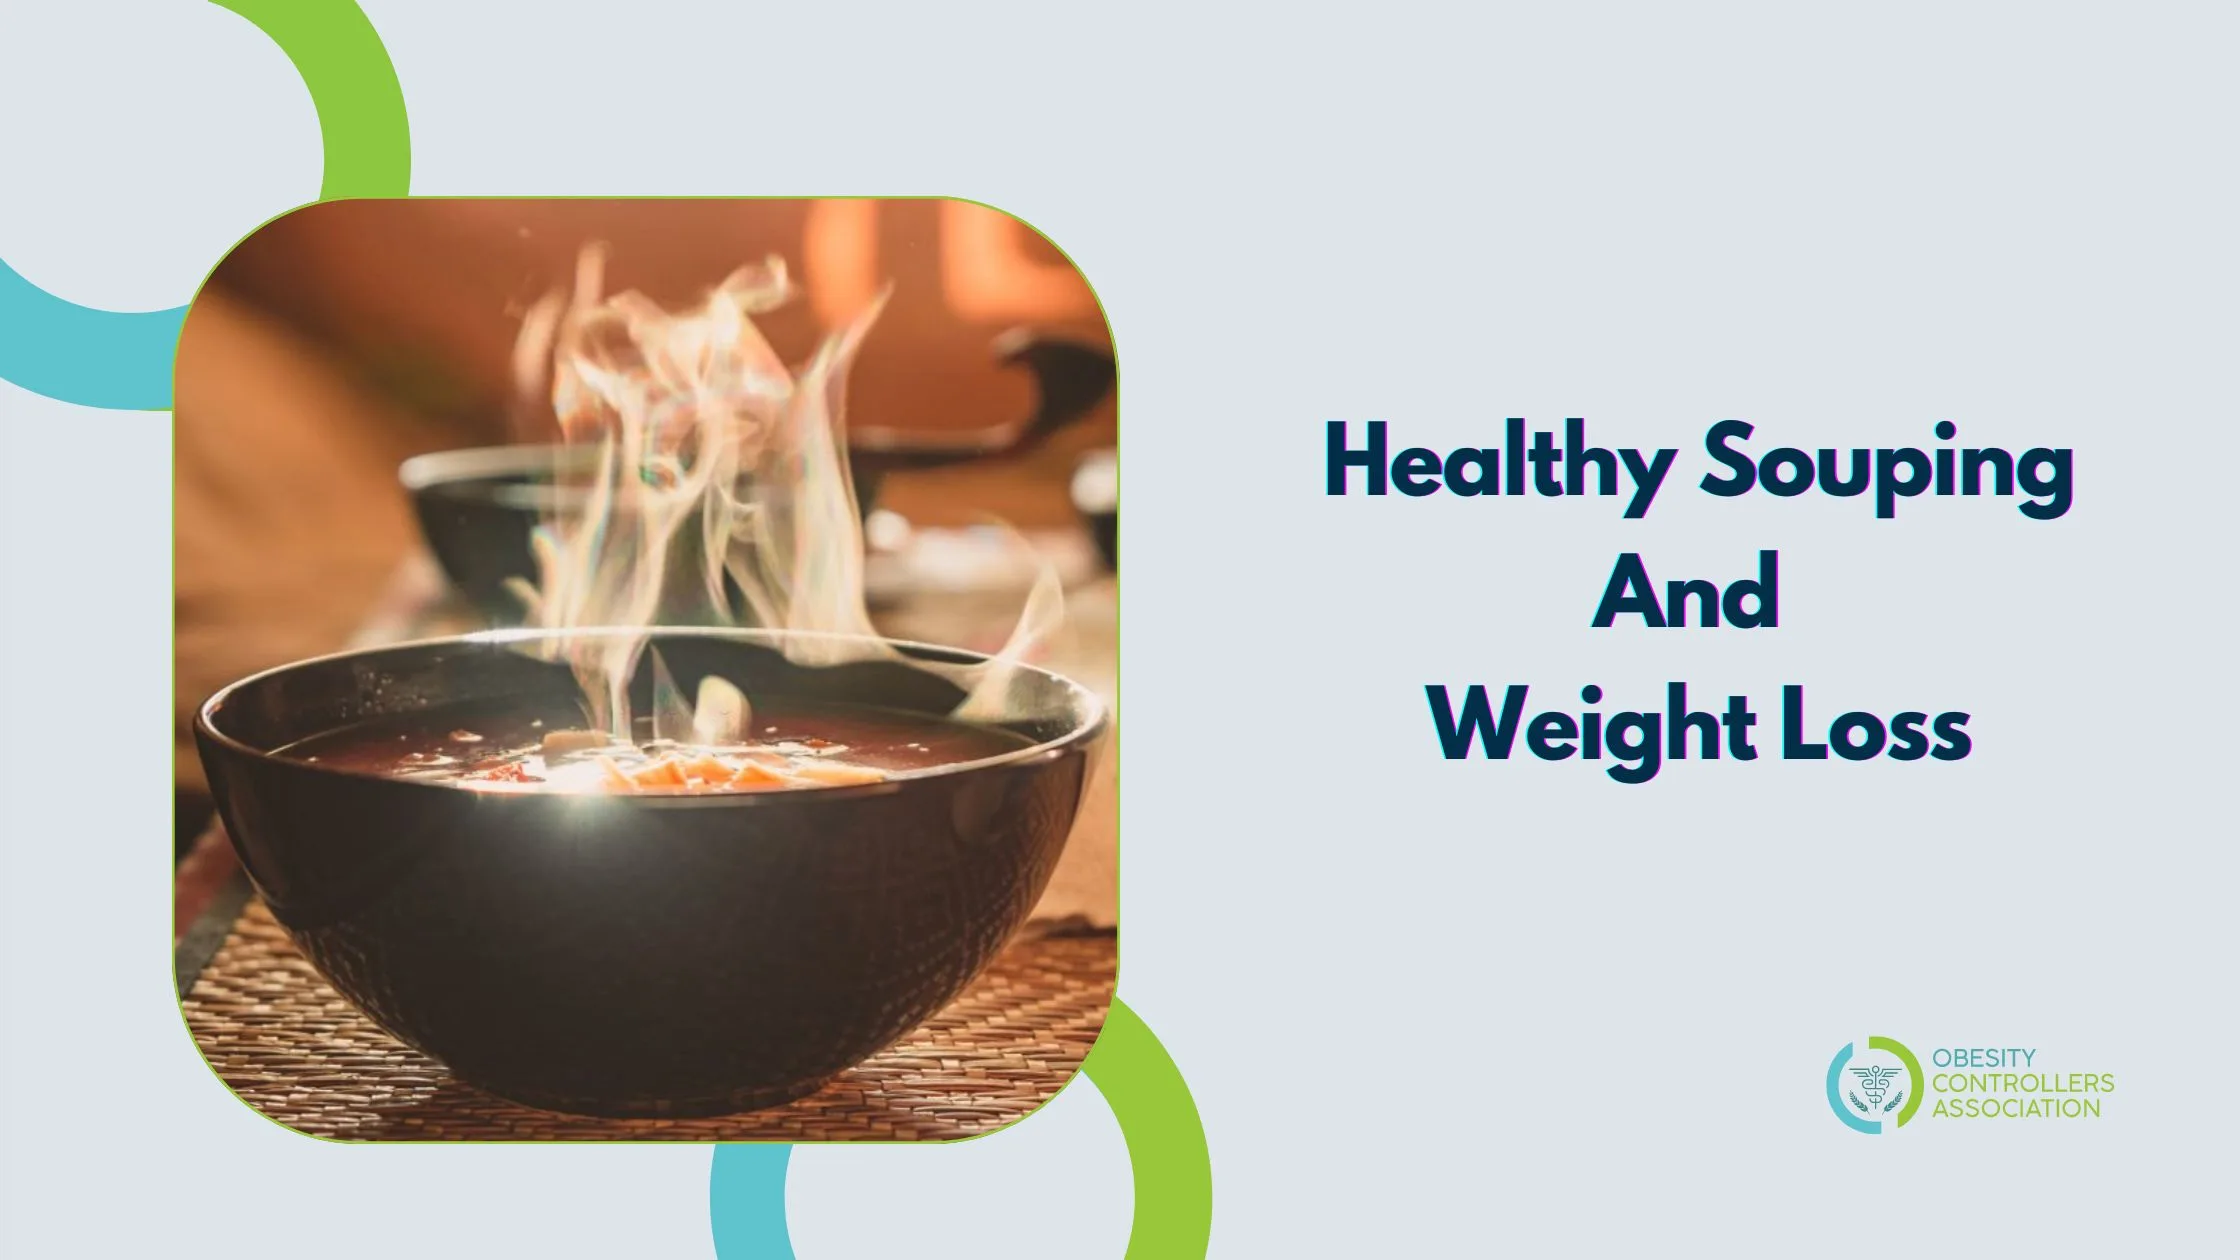 Healthy Souping And Weight Loss